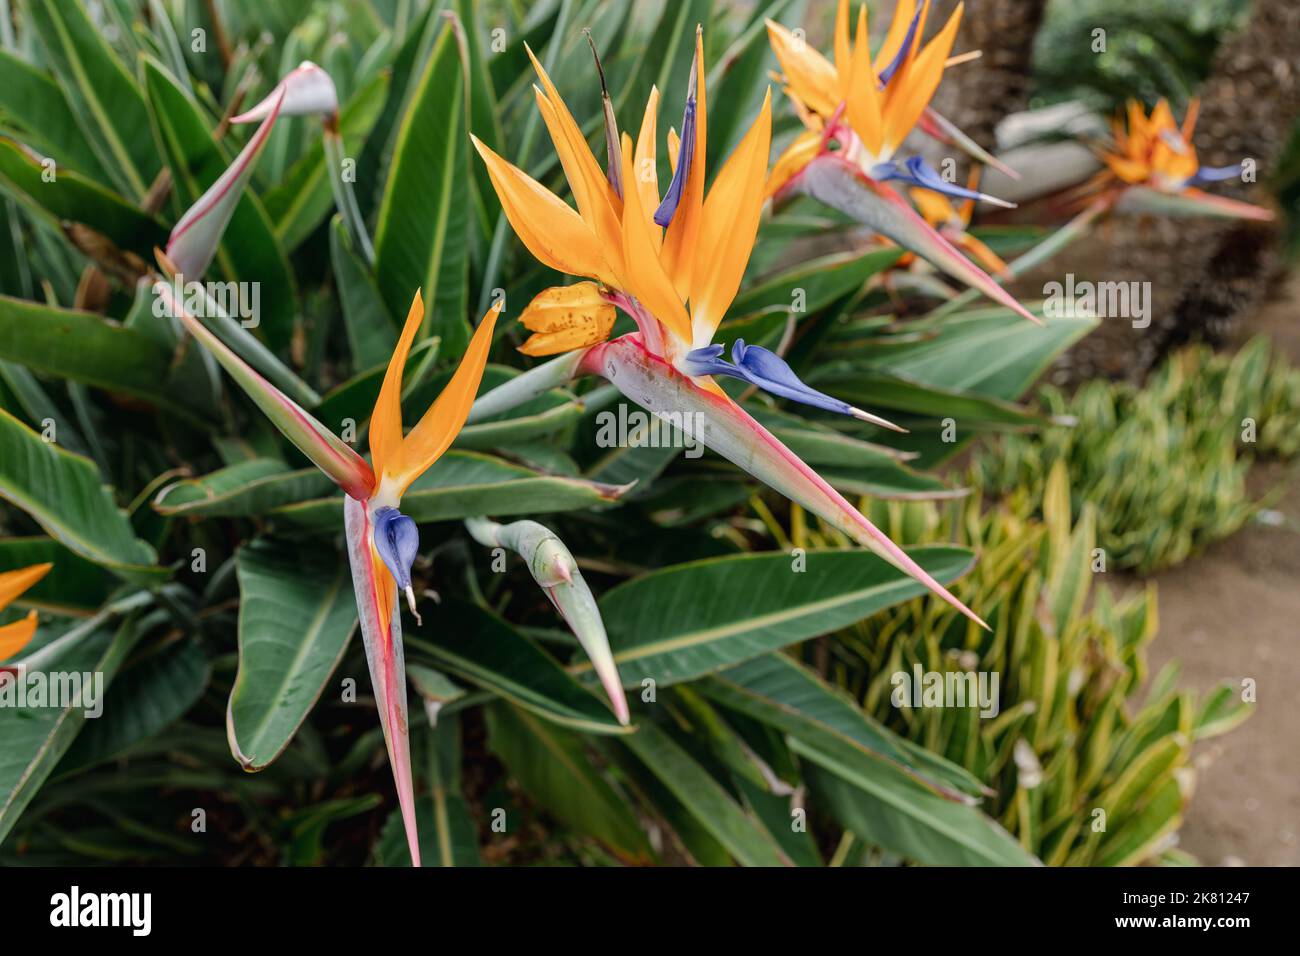 Strelitzia. Bird of Paradise Flower in a Nature Garden, Abstract. Macro, shallow depth of field, texture background, flower close-up. Stock Photo